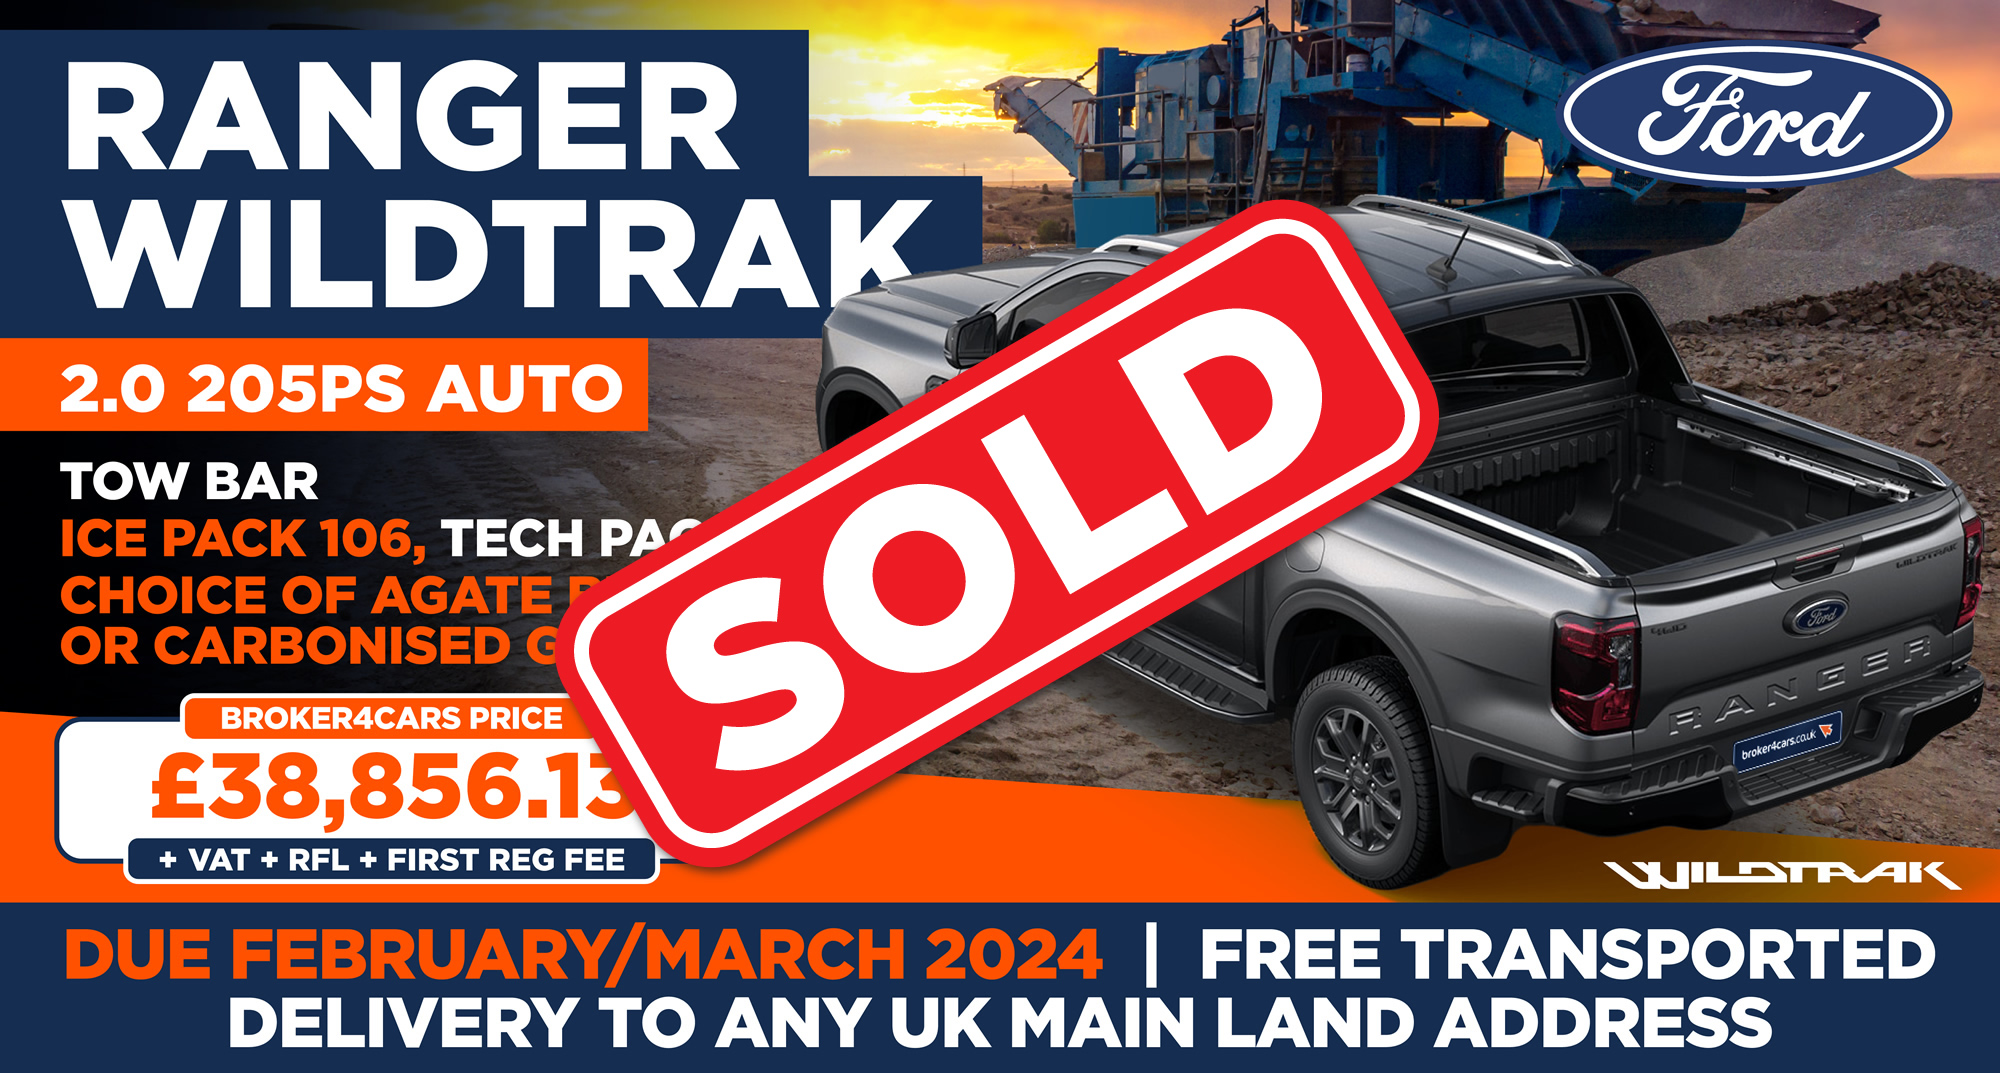 Ranger Wildtrak 2.0 205PS AutoTow Bar, Ice Pack 106, Tech Pack 68, Choice of Agate Black or Carbonised Grey